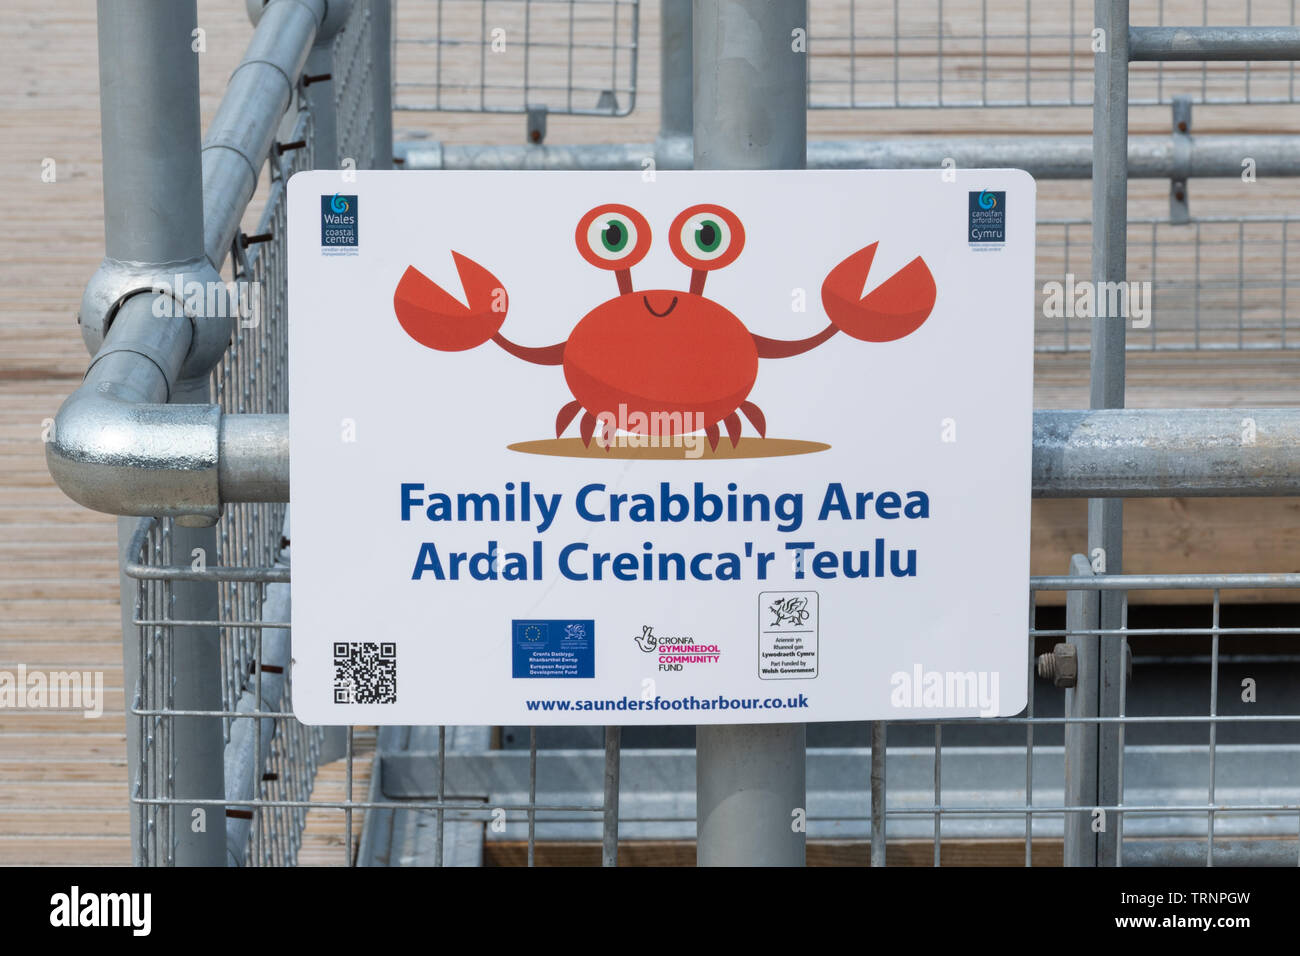 Sign at the Family Crabbing Area of Saundersfoot harbour in Pembrokeshire, Wales Stock Photo